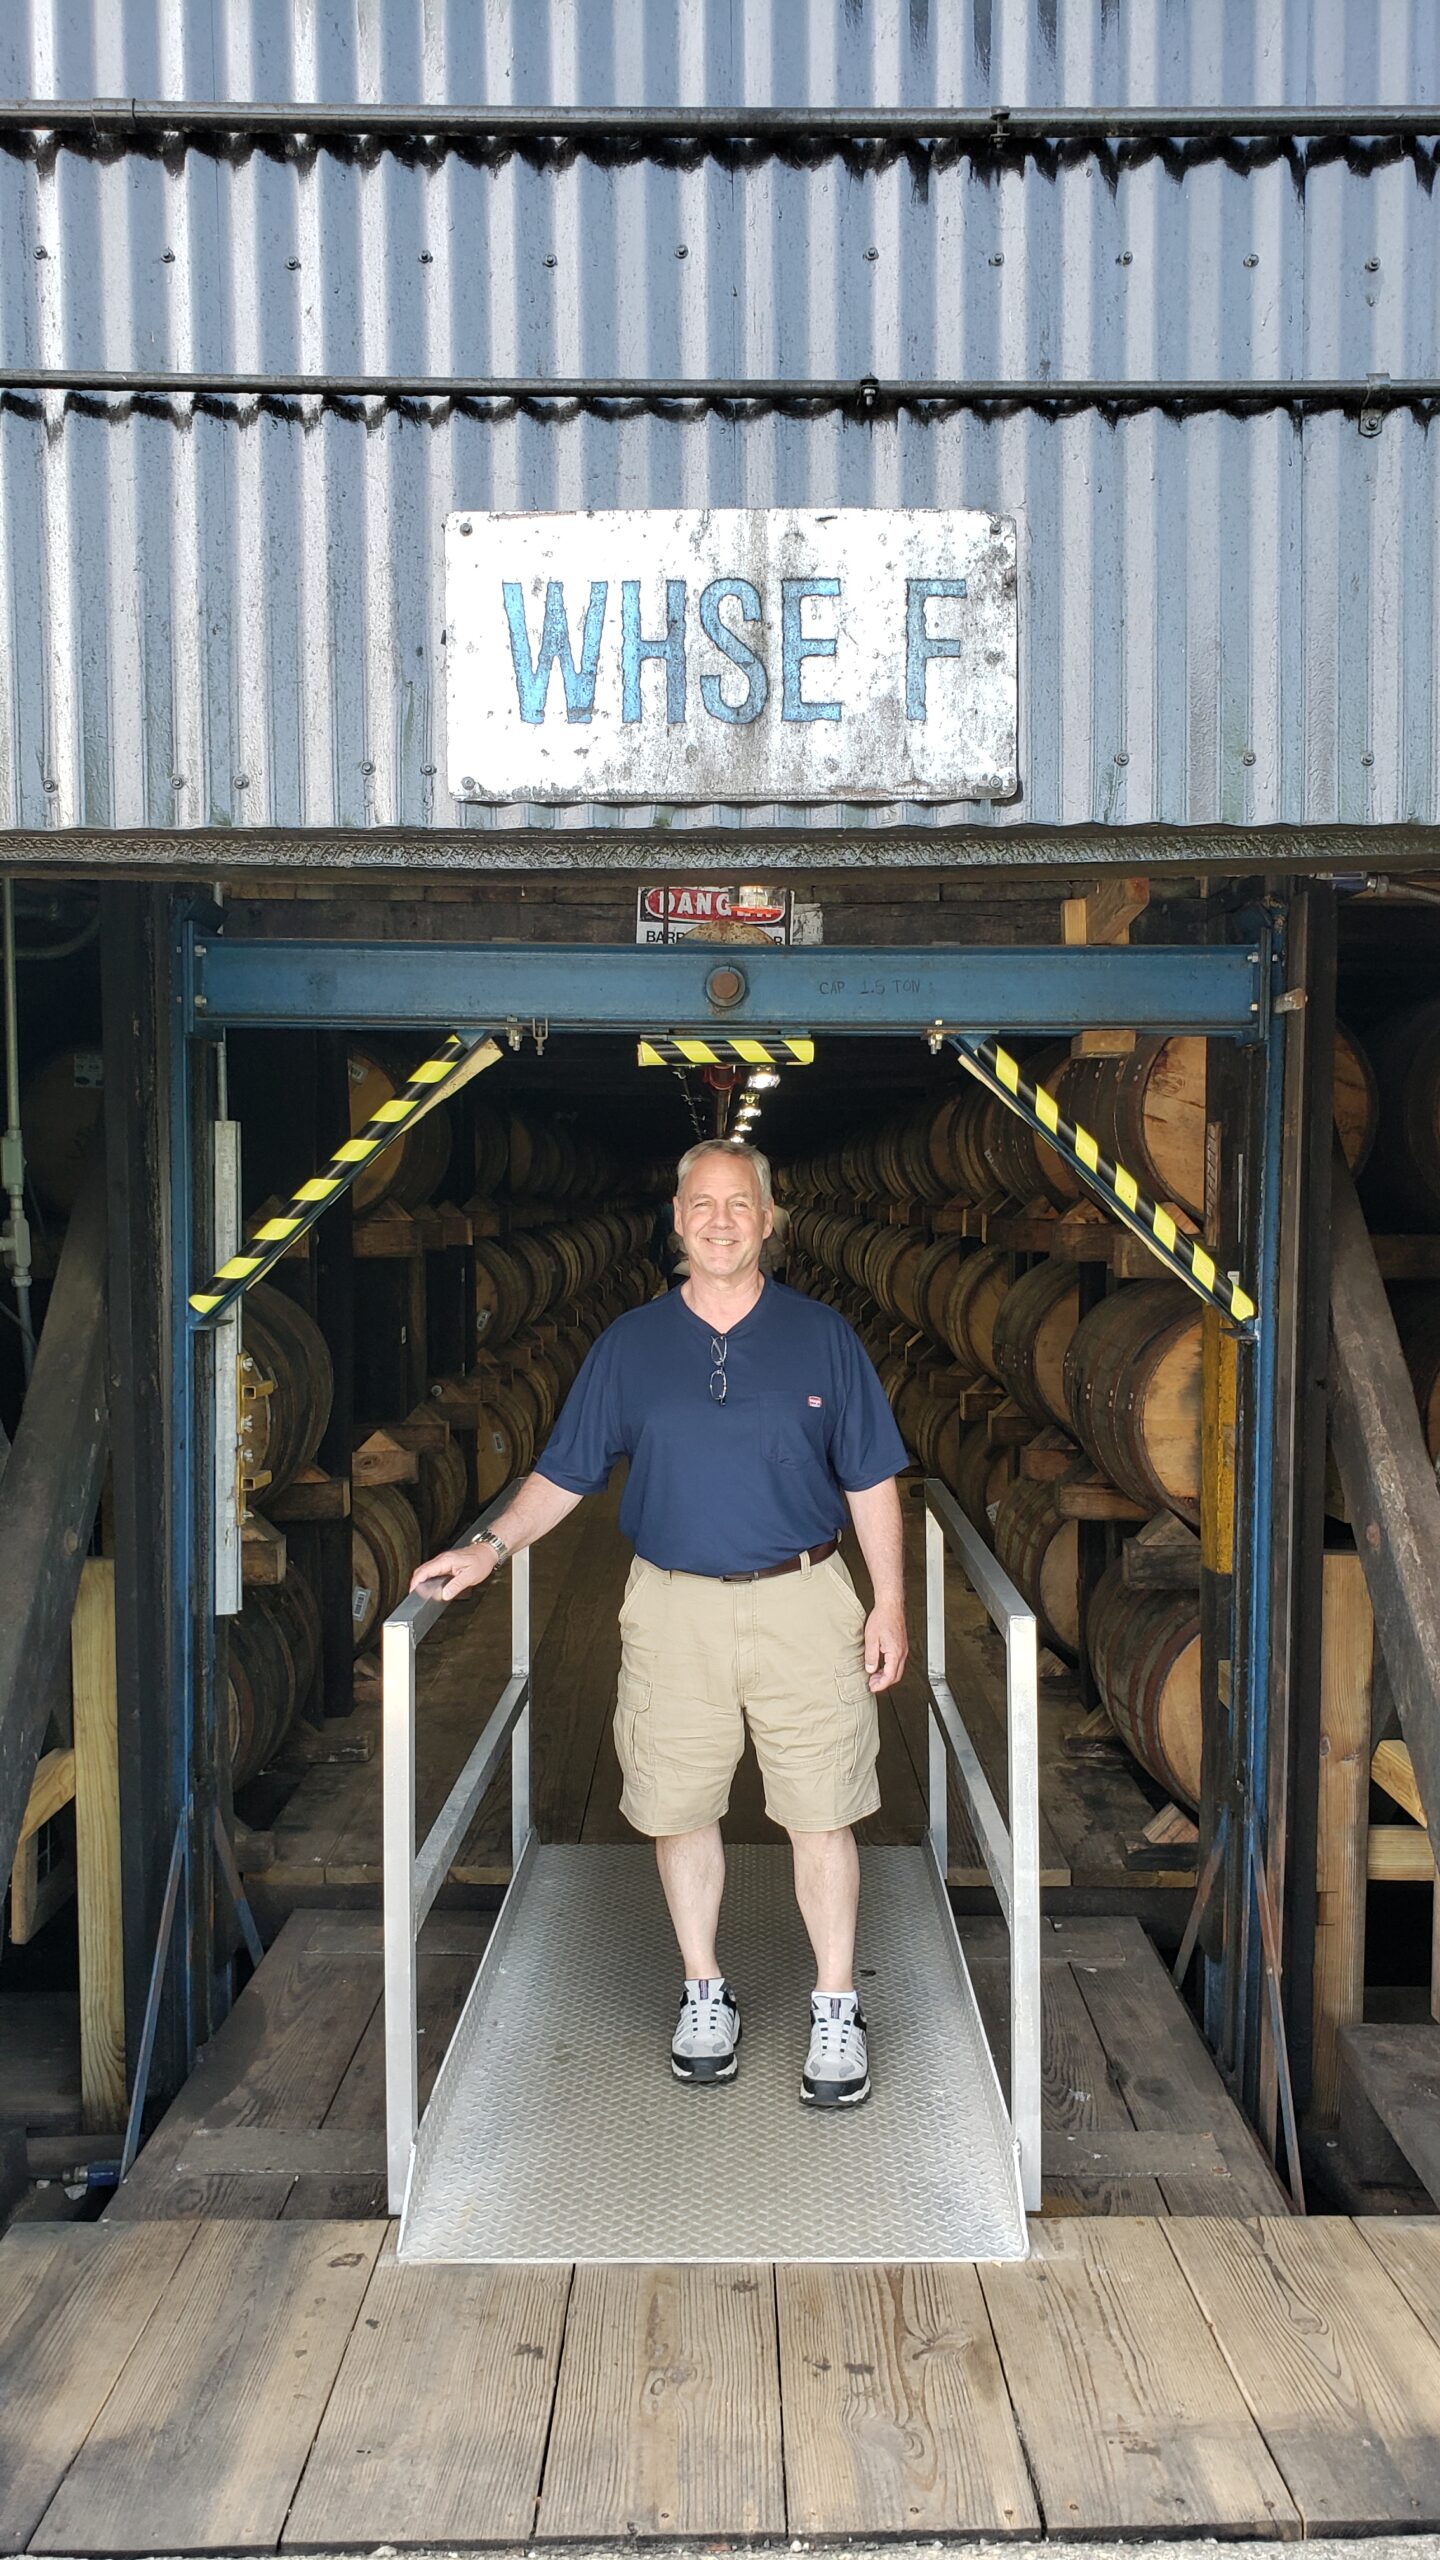 Kentucky Bourbon Trail 2023 - Jim Beam Distillery Tour - Dad in front of Warehouse F